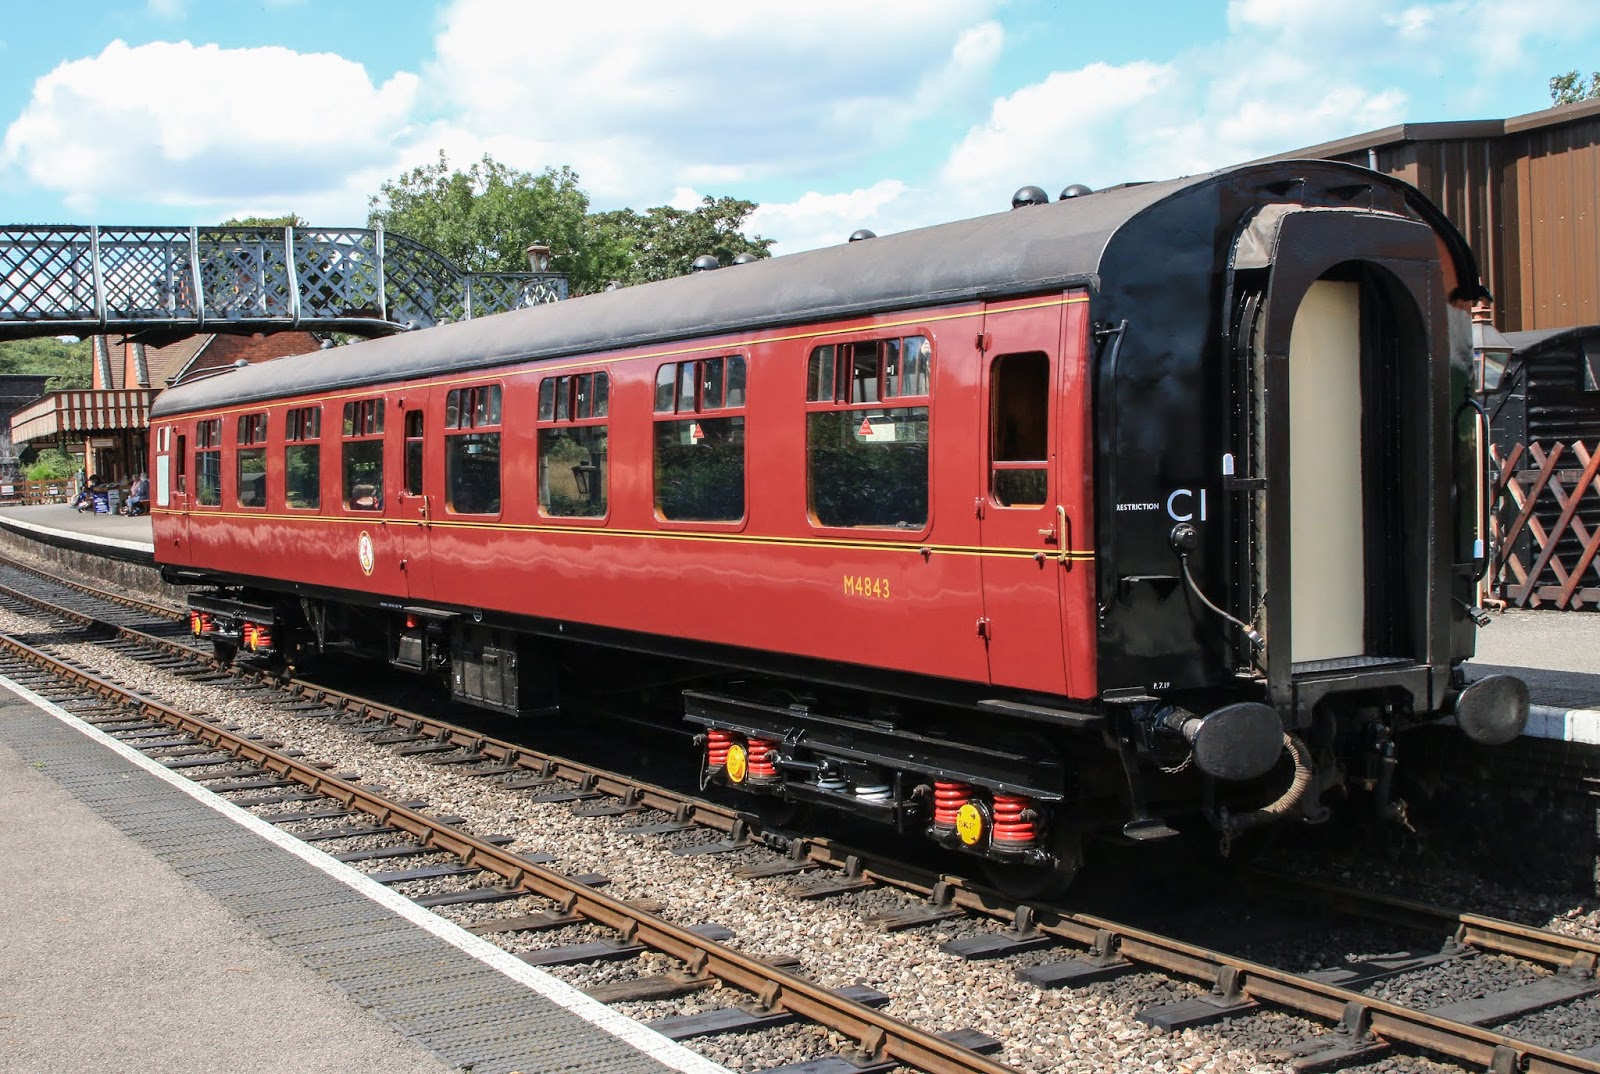 Carriage & Wagon News: COMPLETION SPECIAL: Mark 1 Tourist Second Open M4843